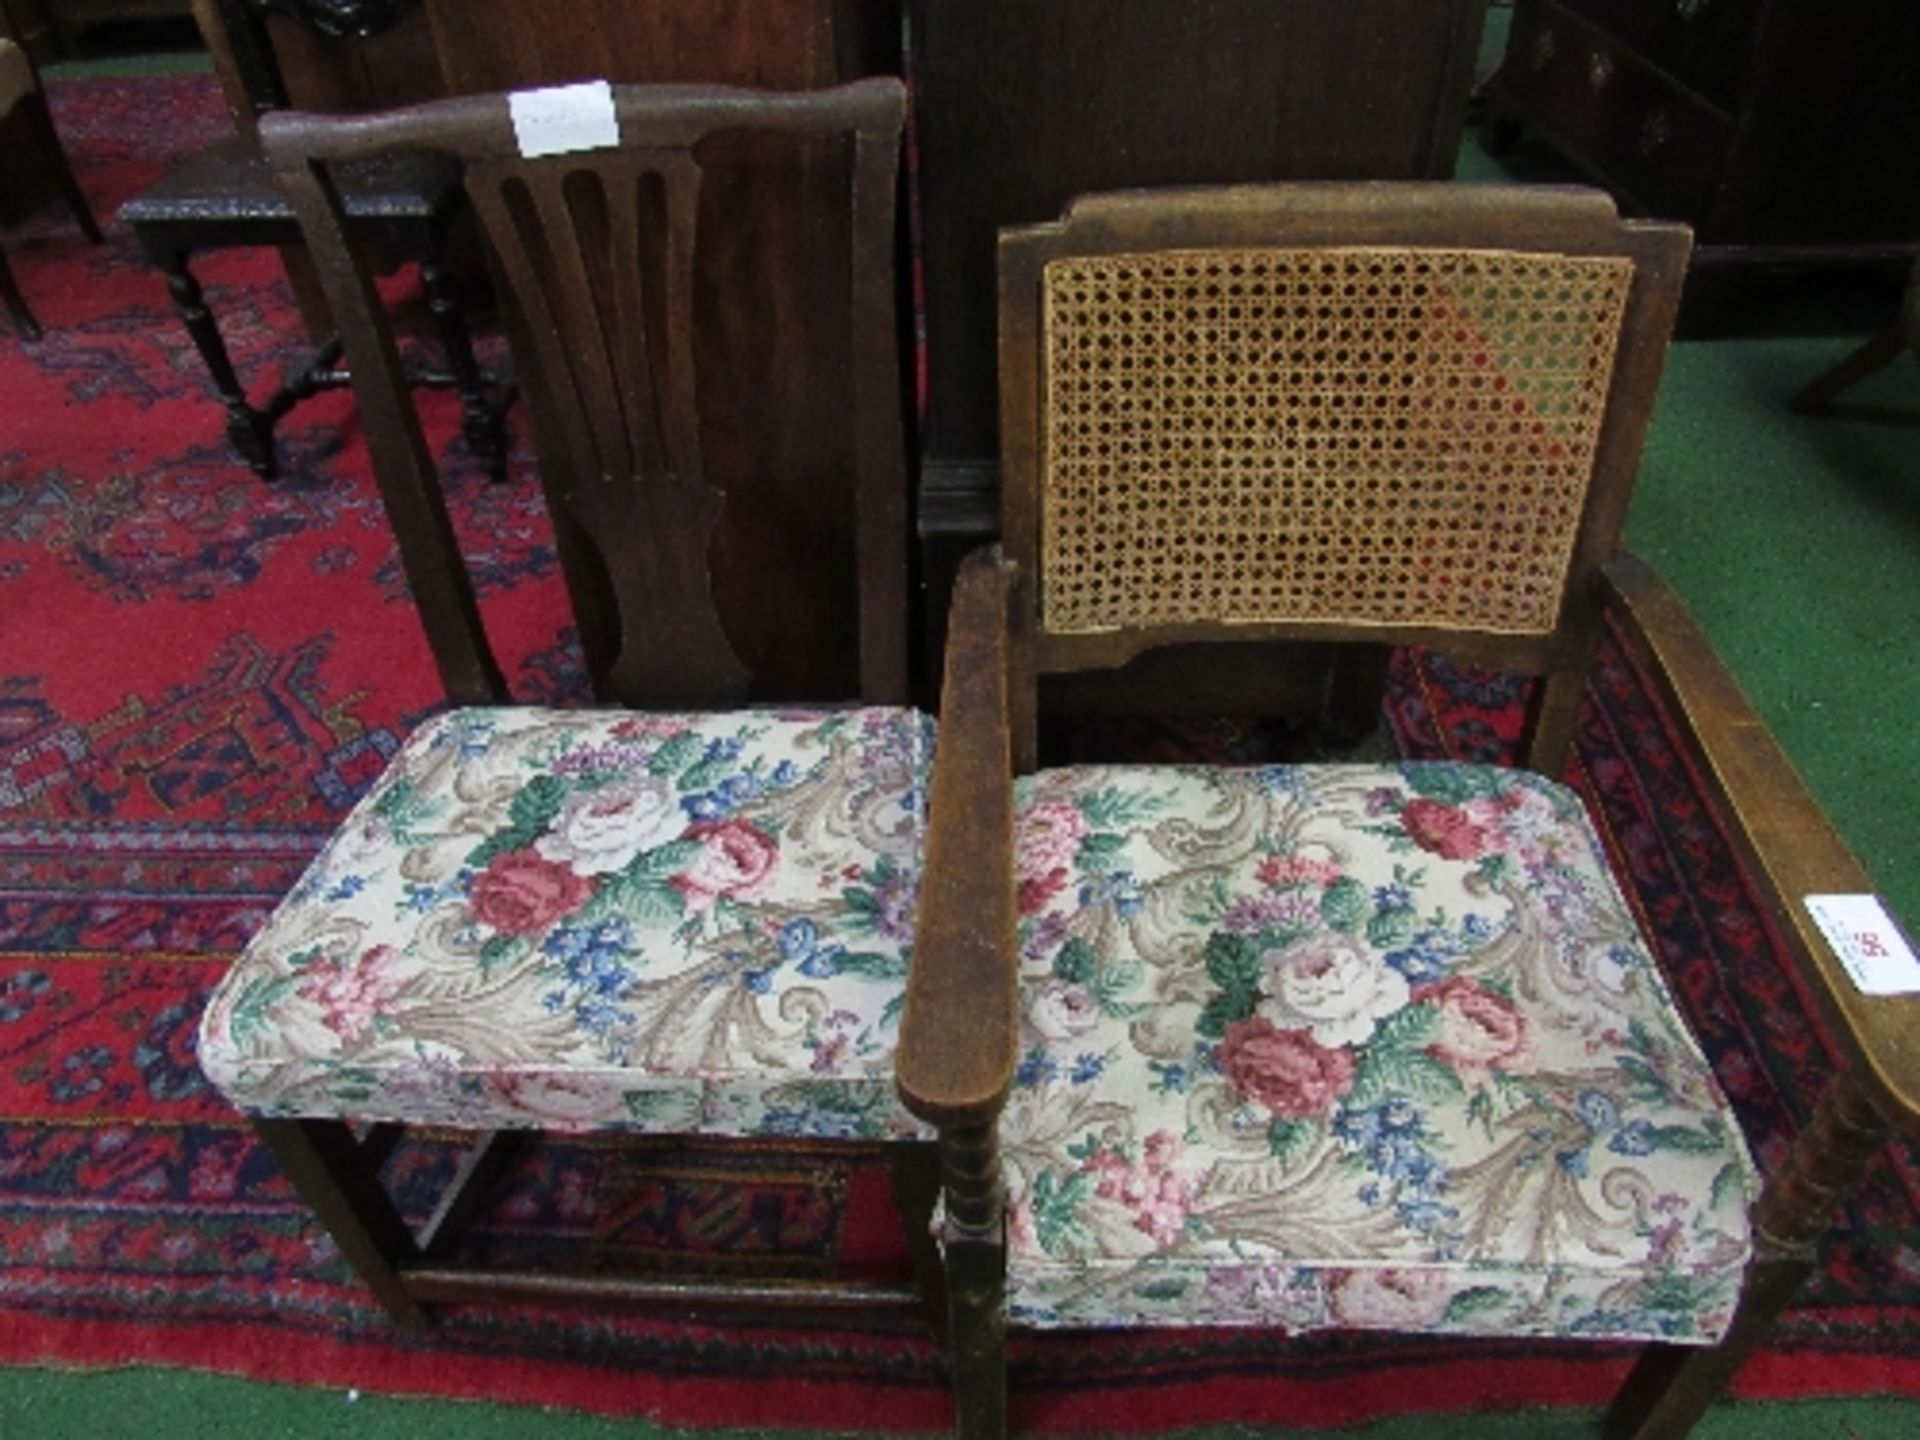 Cane back low open armchair together with Chippendale-style dining chair. Estimate £10-20